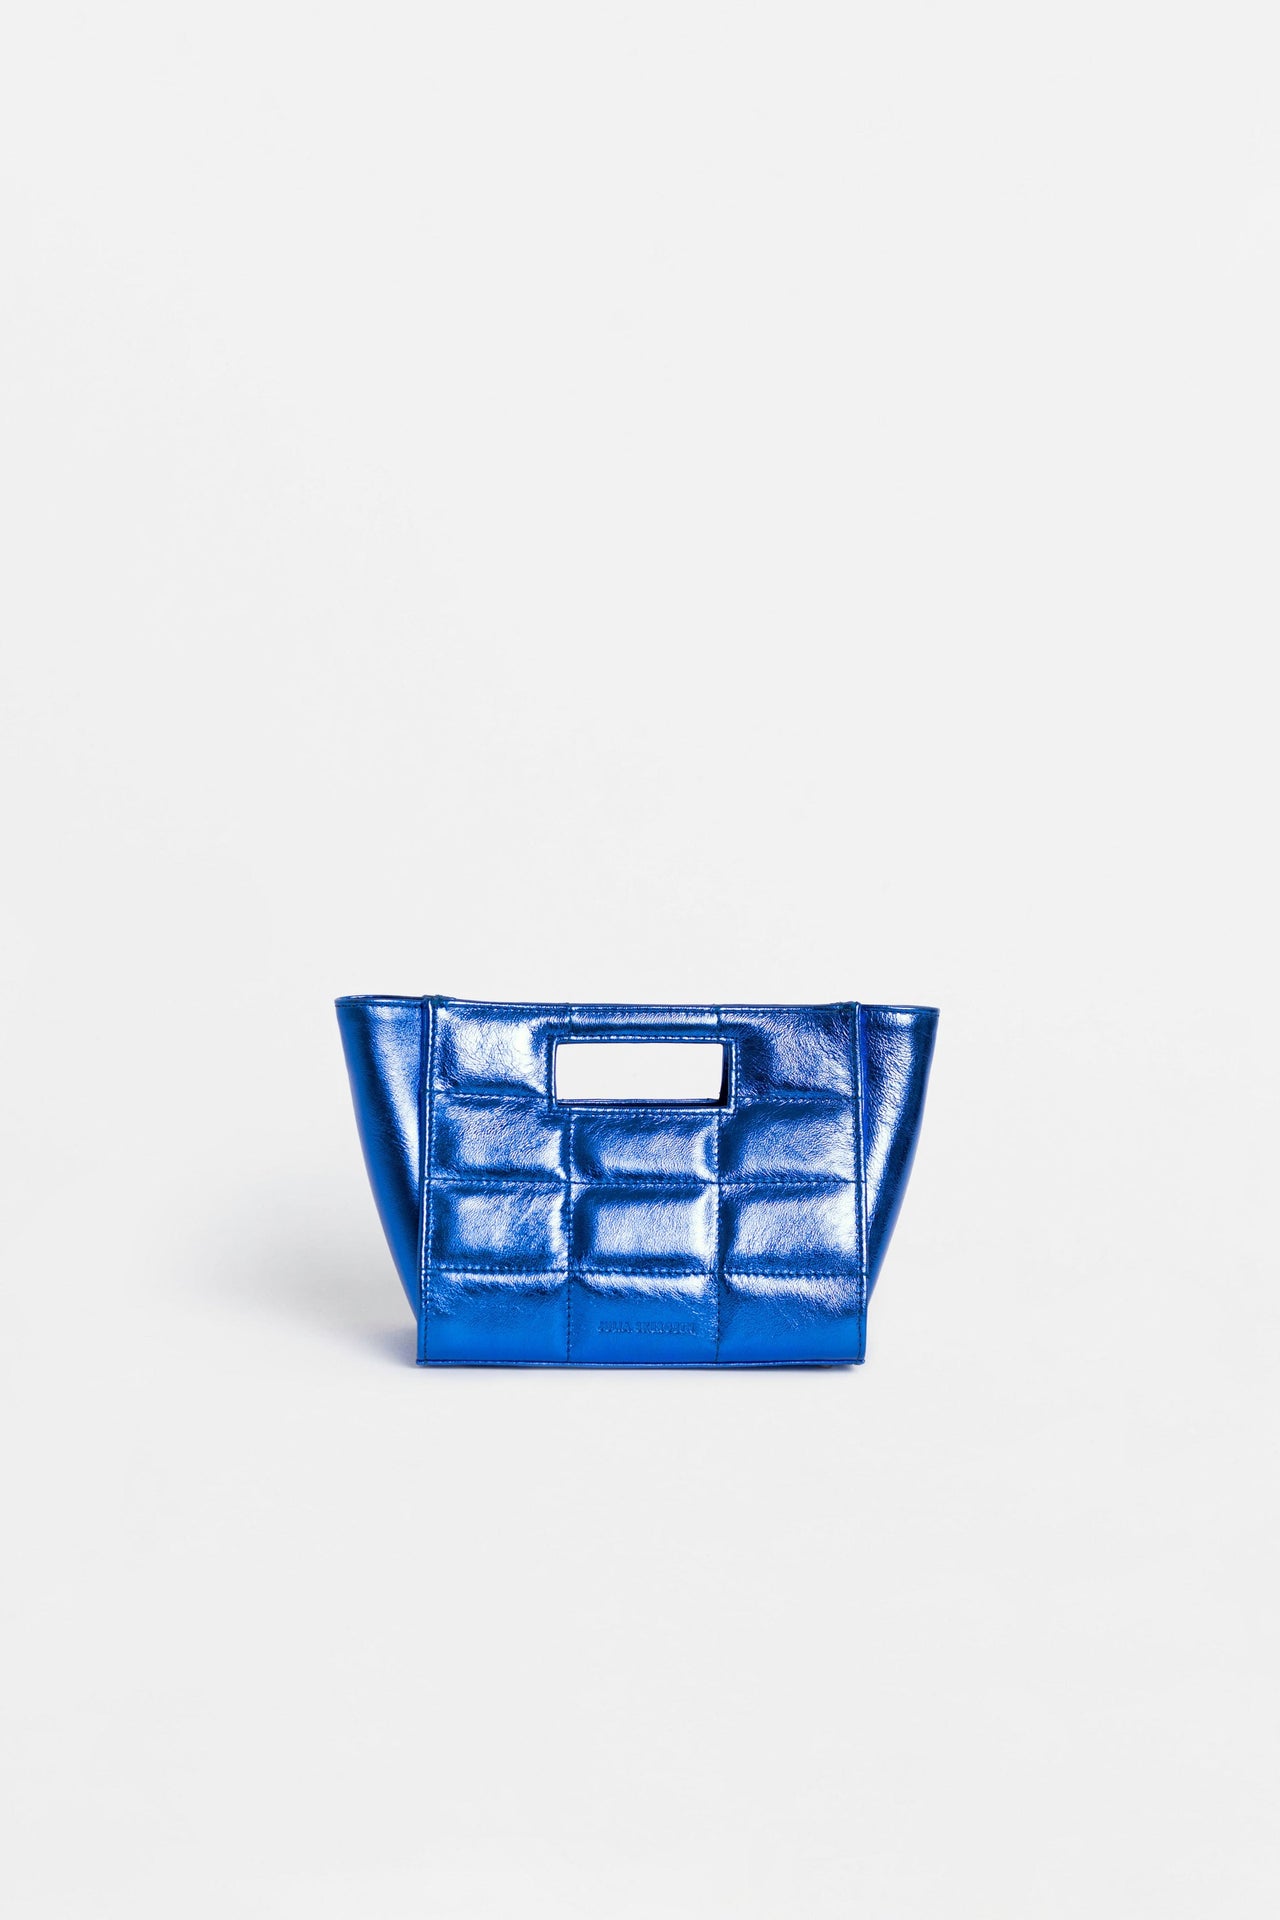 The QUILTED BAG MINI Electric Blue - JULIA SKERGETH